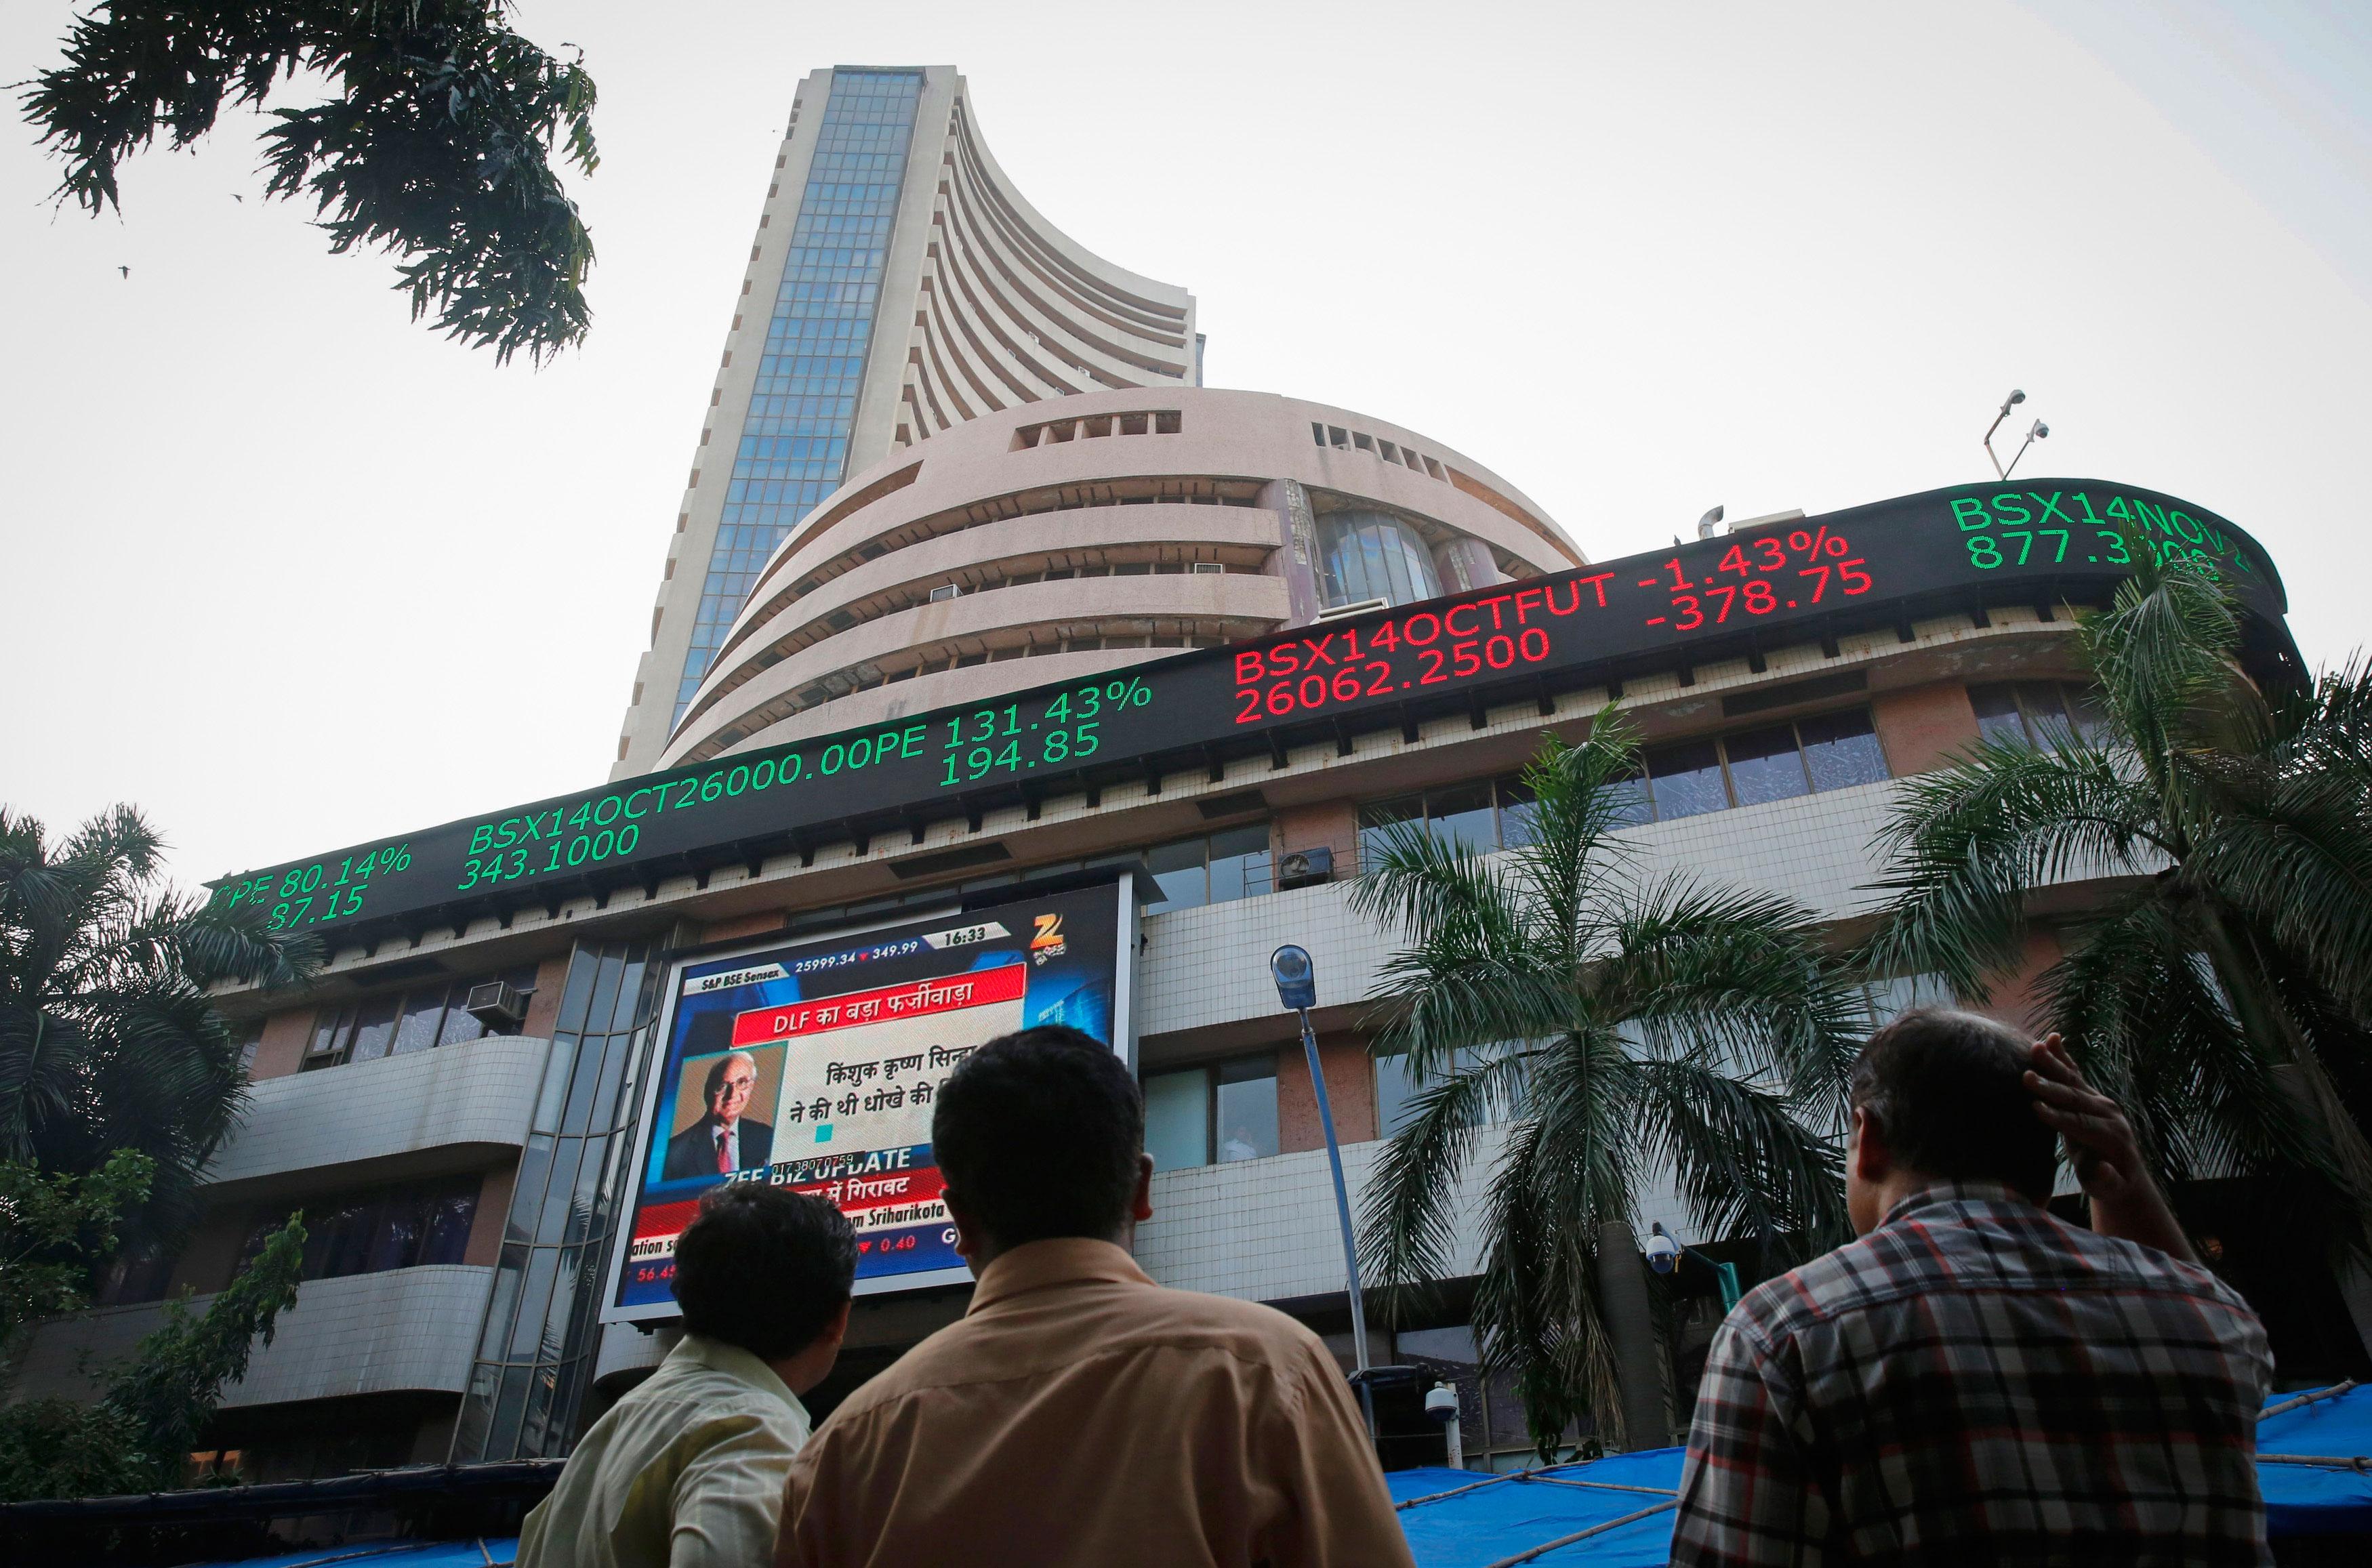 Sensex slides further to near 8-month low